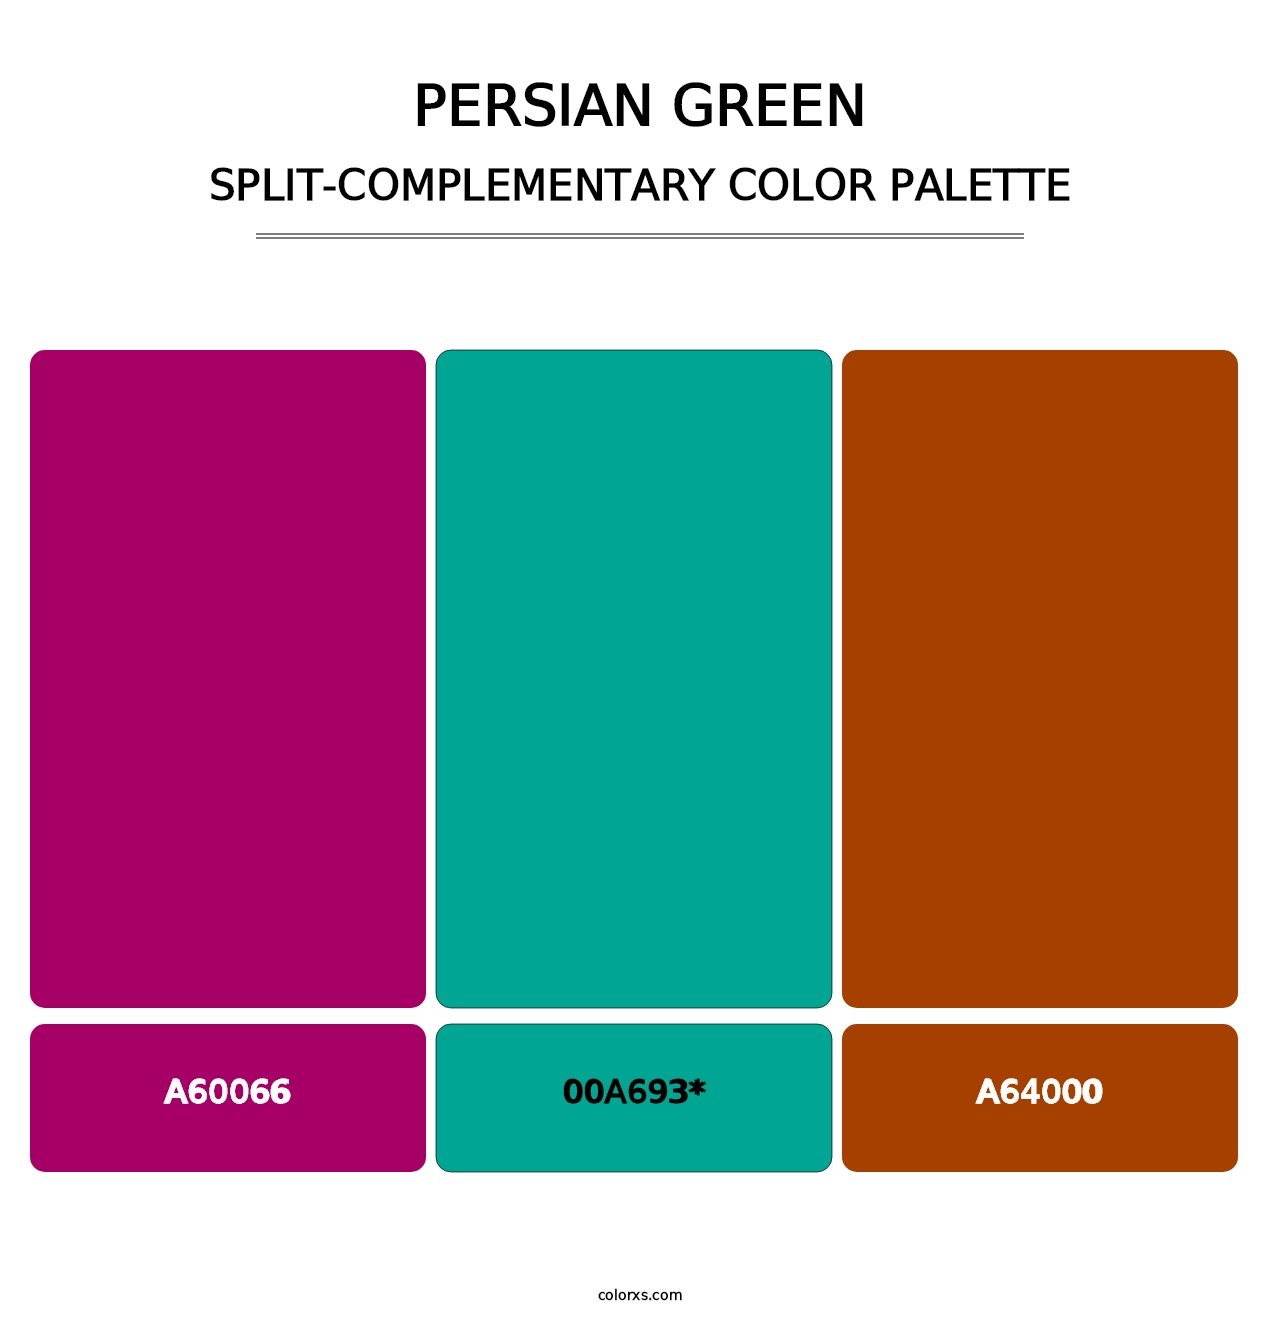 Persian Green - Split-Complementary Color Palette